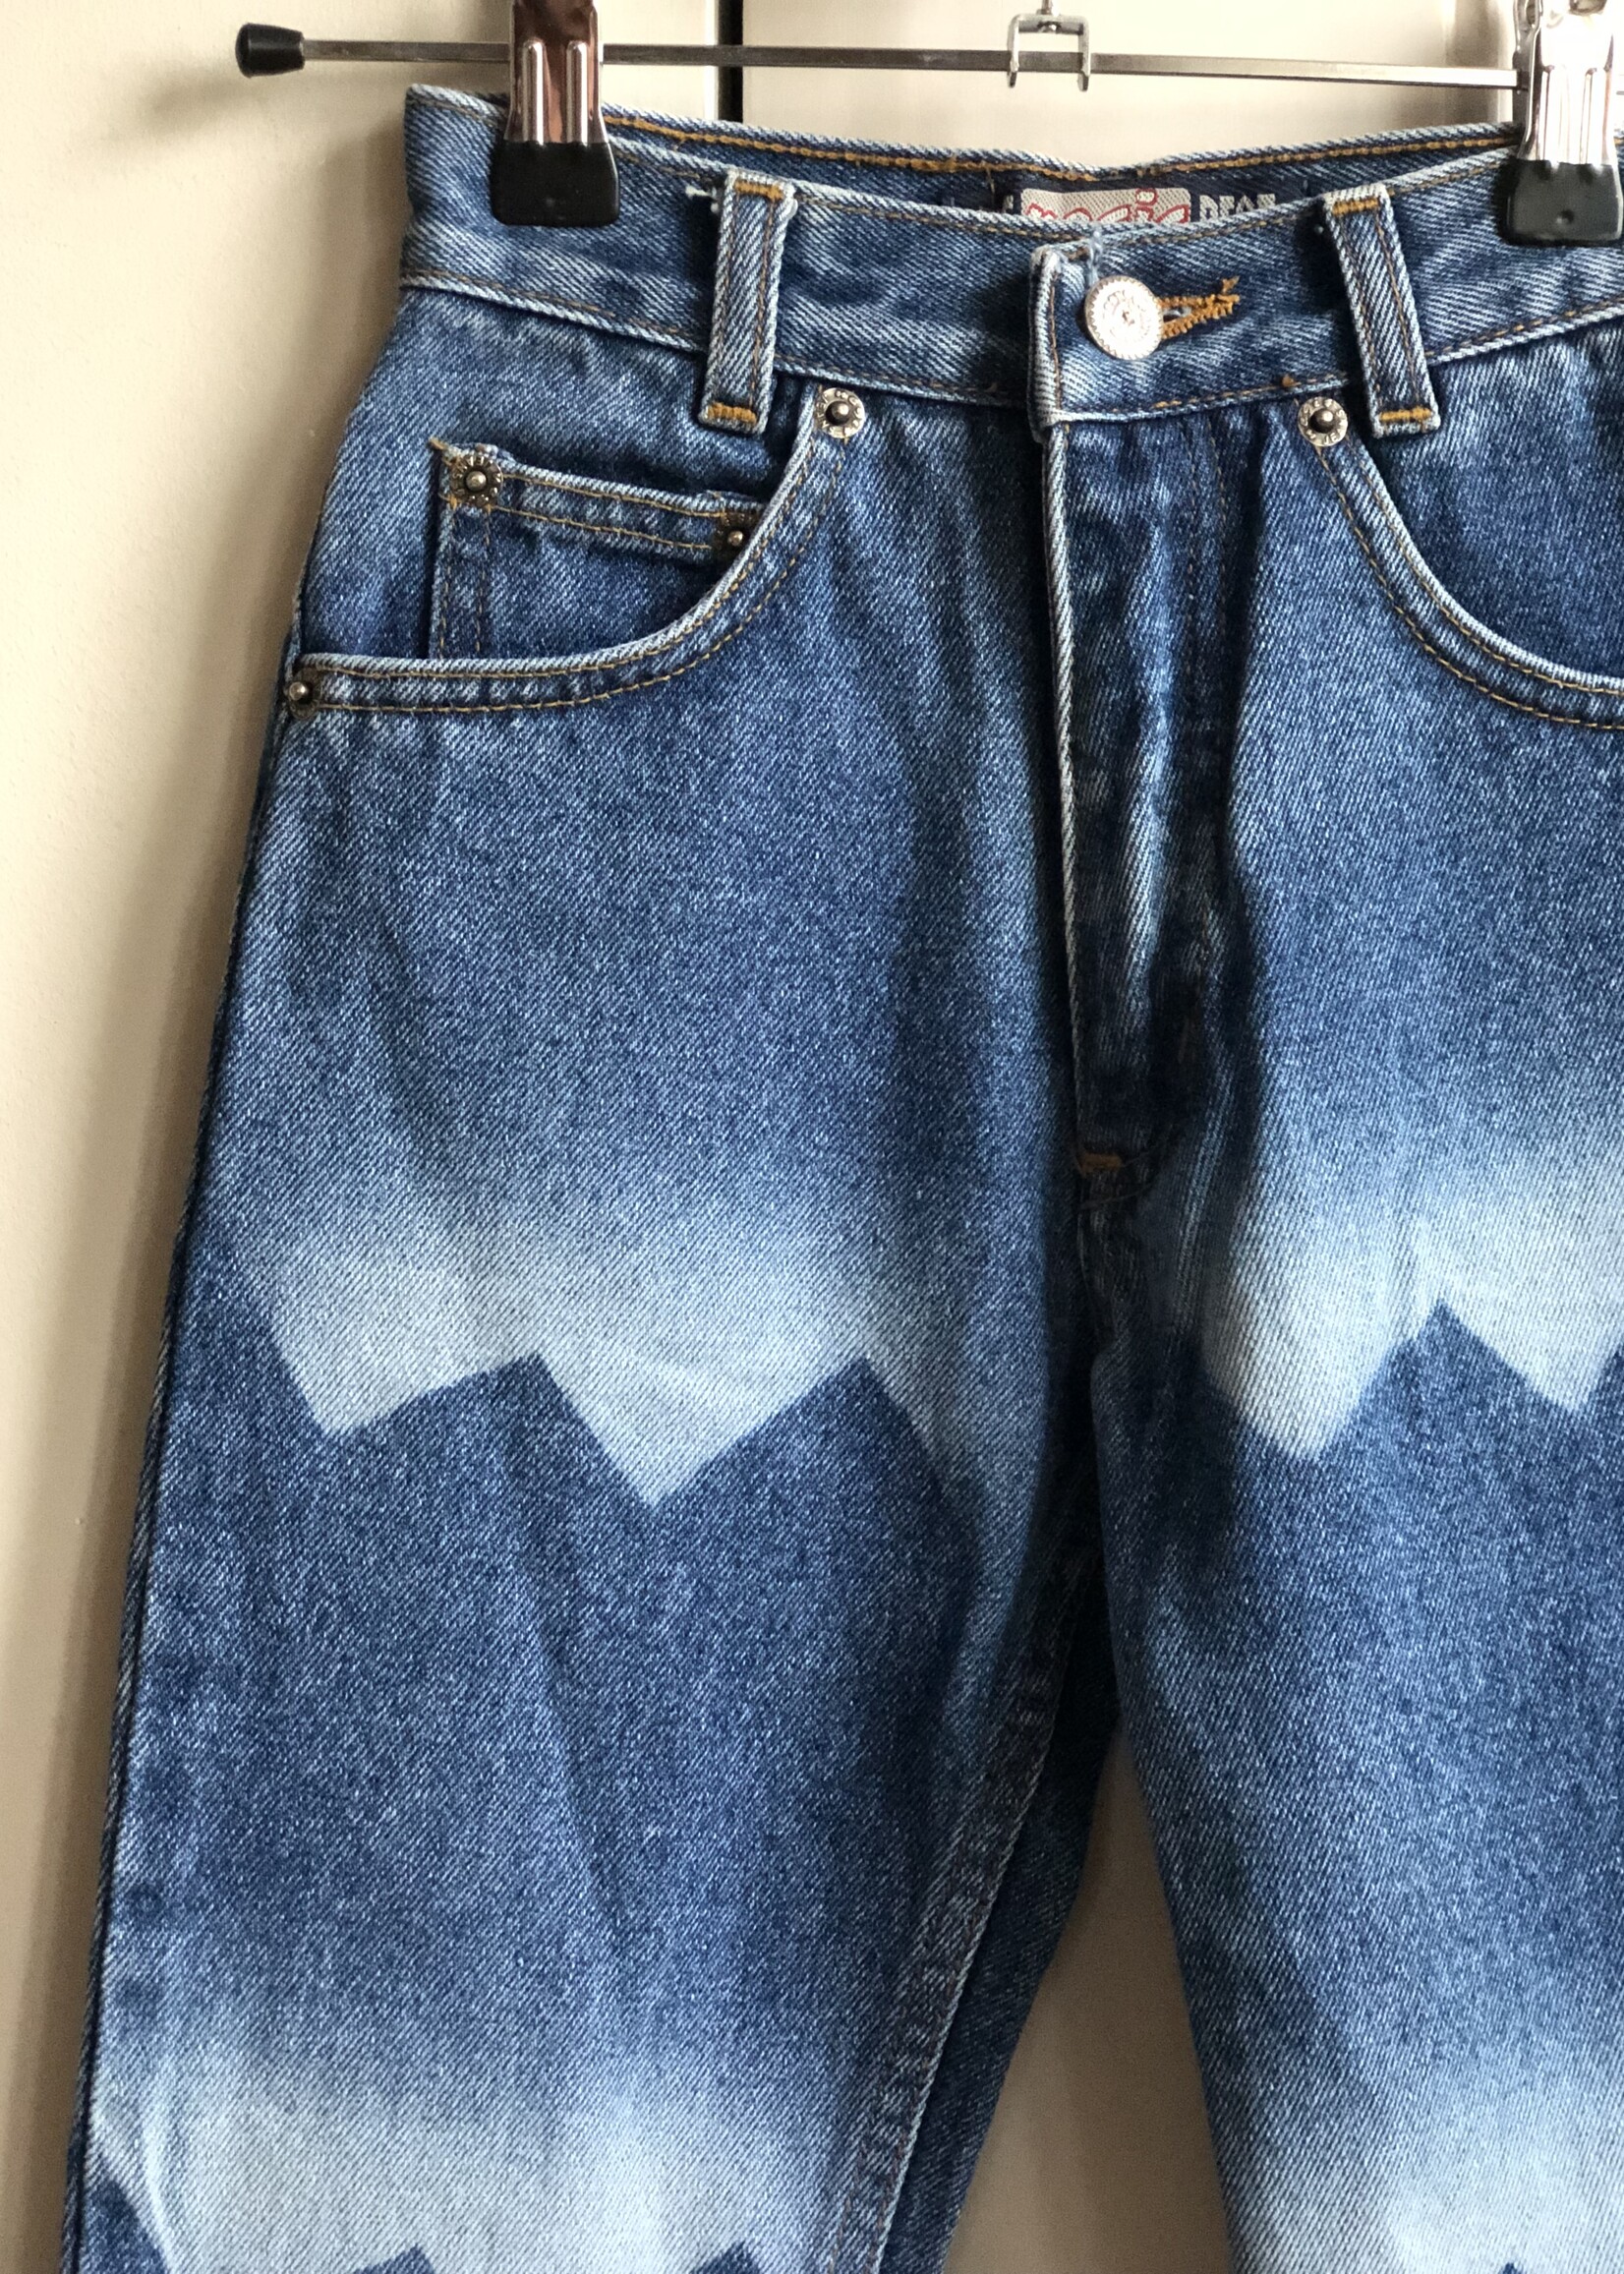 Mountains jeans 6y